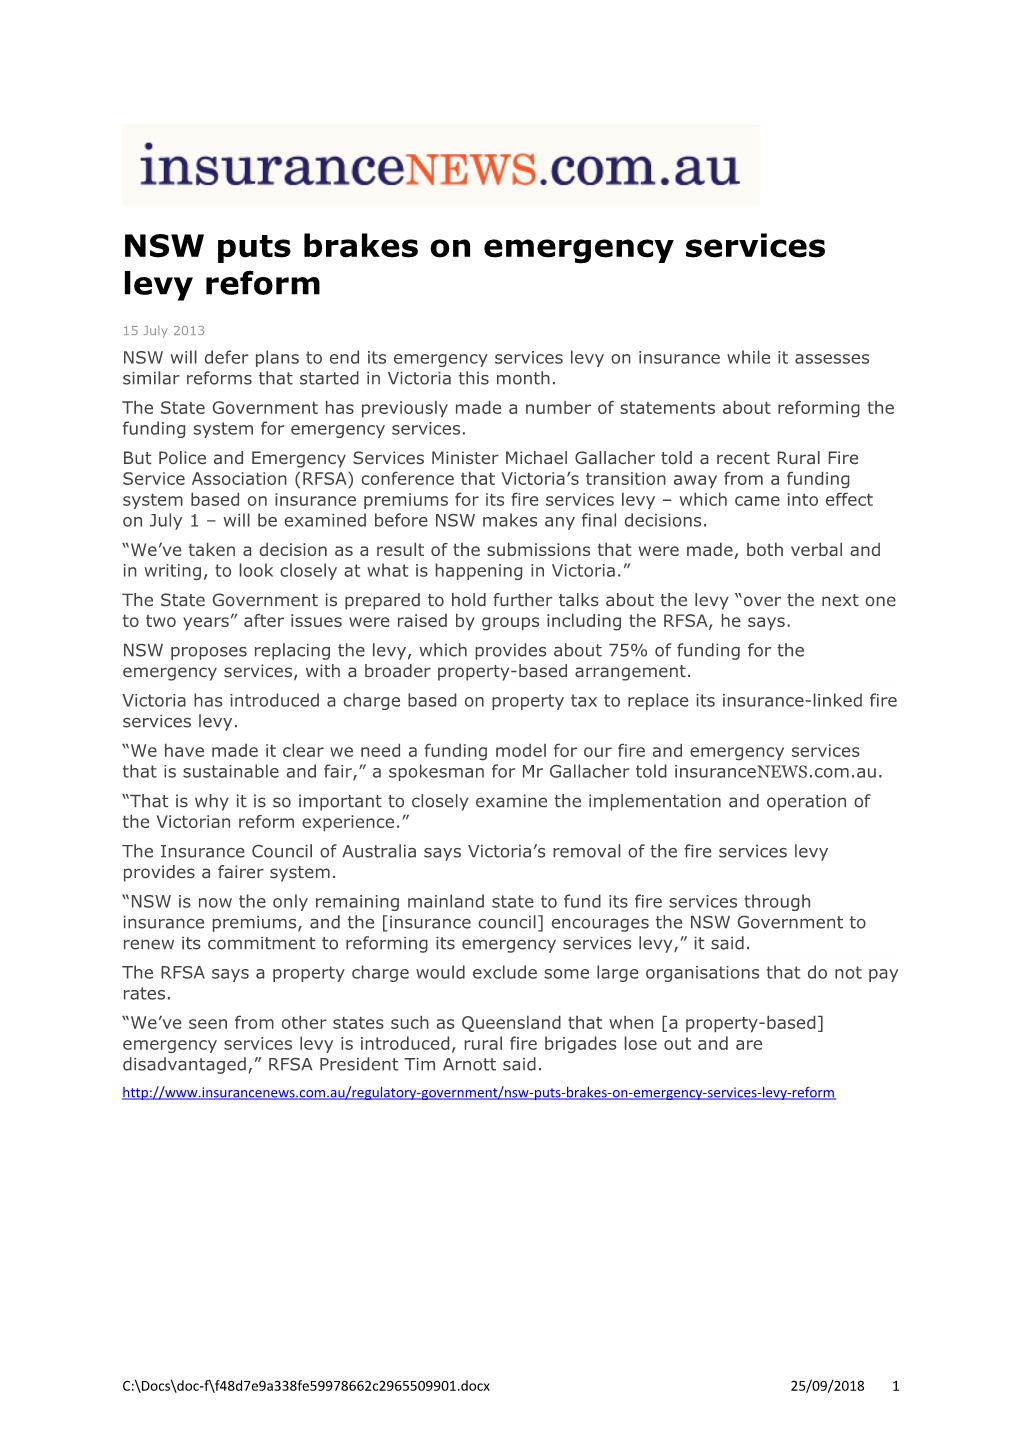 NSW Puts Brakes on Emergency Services Levy Reform